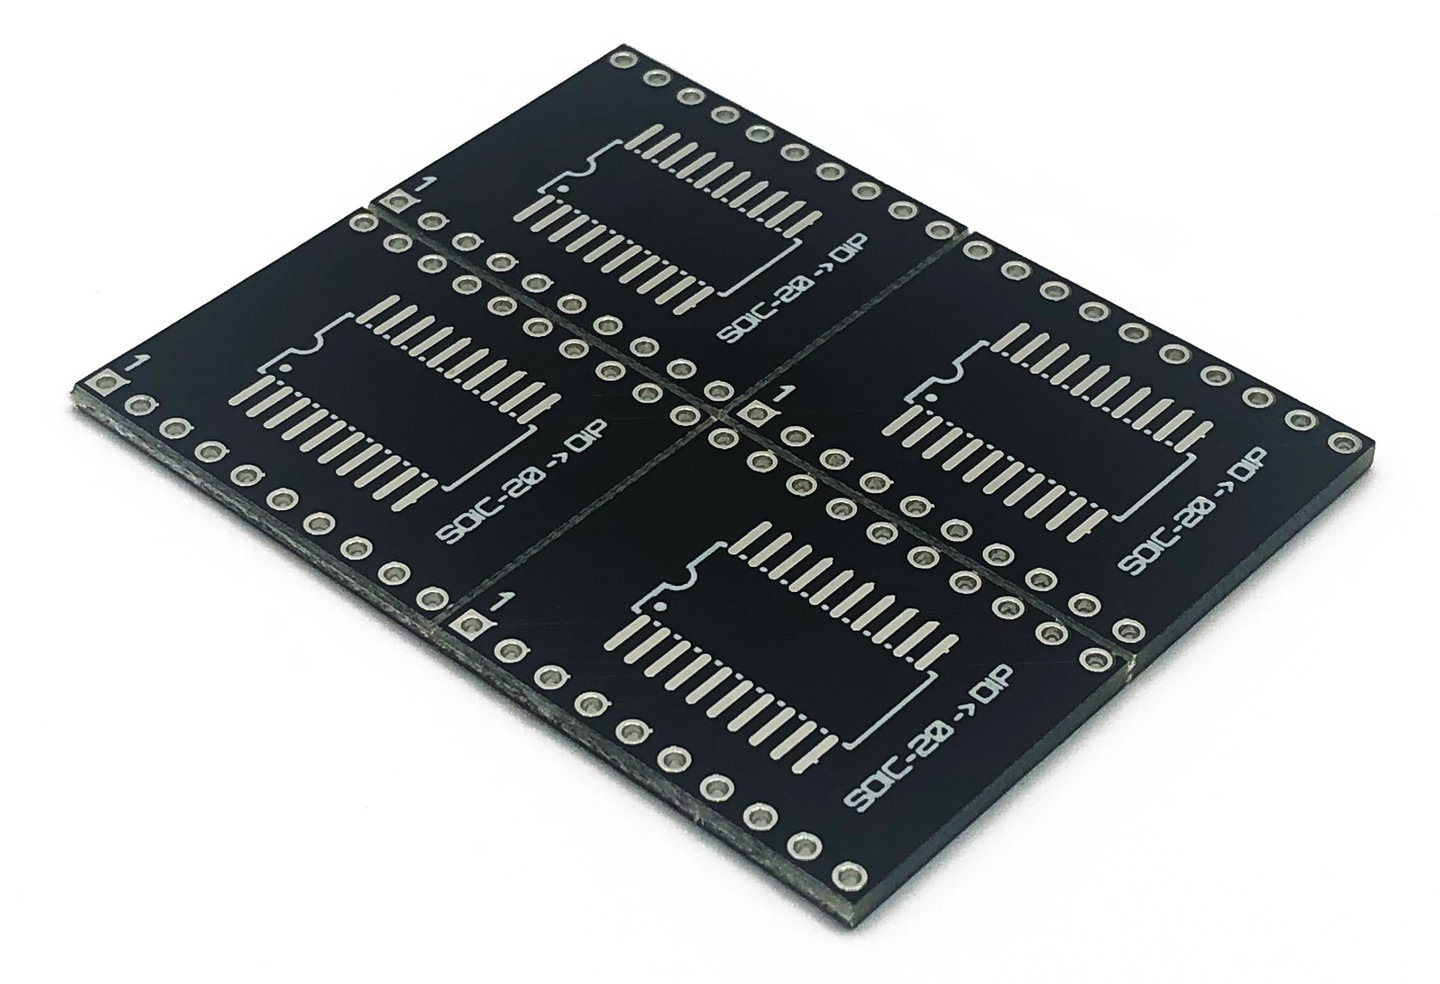 SOIC-20 (Wide Package) to DIP-20 Breakout Board